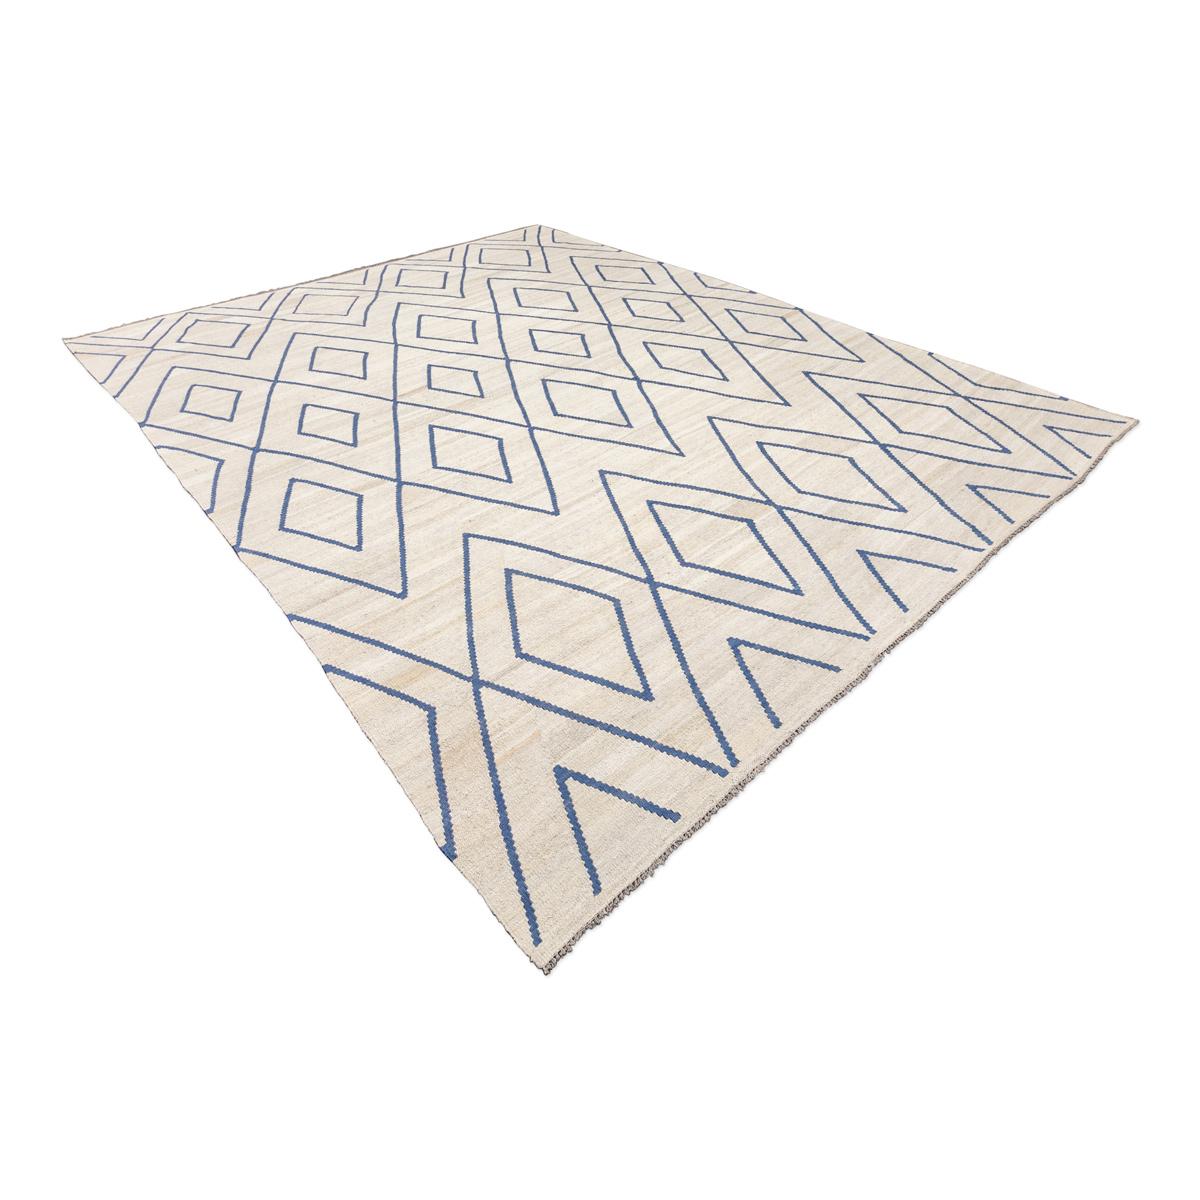 Contemporary kilim handcrafted in the craft workshops that the Zigler firm has in Pakistan.
- Made with aged wool.
- Measures: 2,80 x 3,60 m.
- Its design is a reinterpretation of the rugs of the North Atlas of Morocco. This type of rugs are a